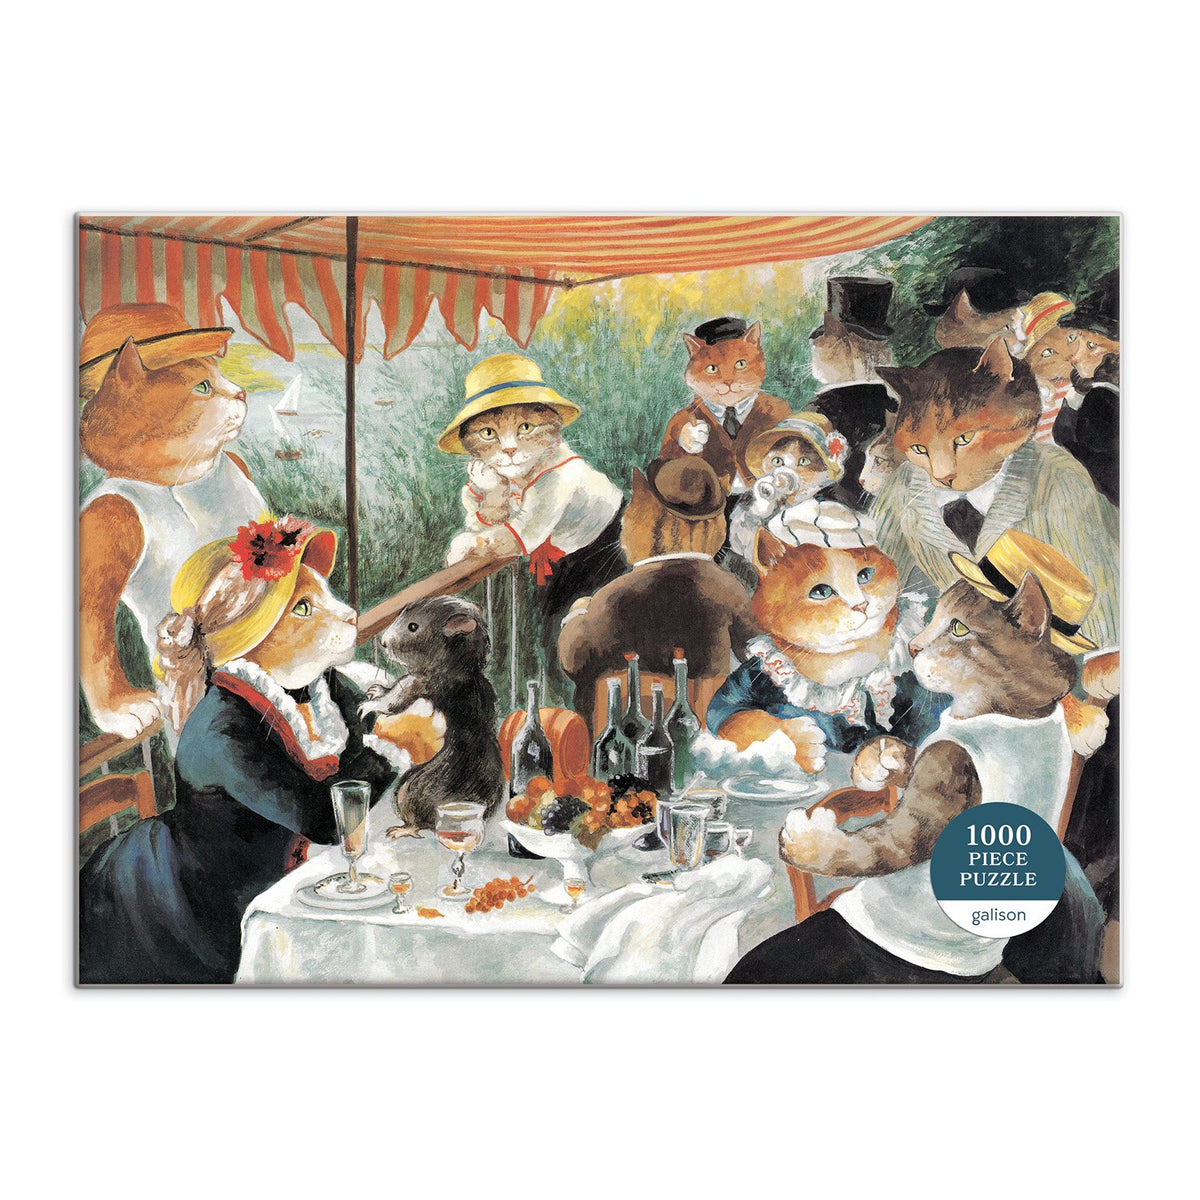 Luncheon of the Boating Party Meowsterpiece of Western Art 1000 Piece Puzzle 1000 Piece Puzzles Meowsterpiece of Western Art Collection 